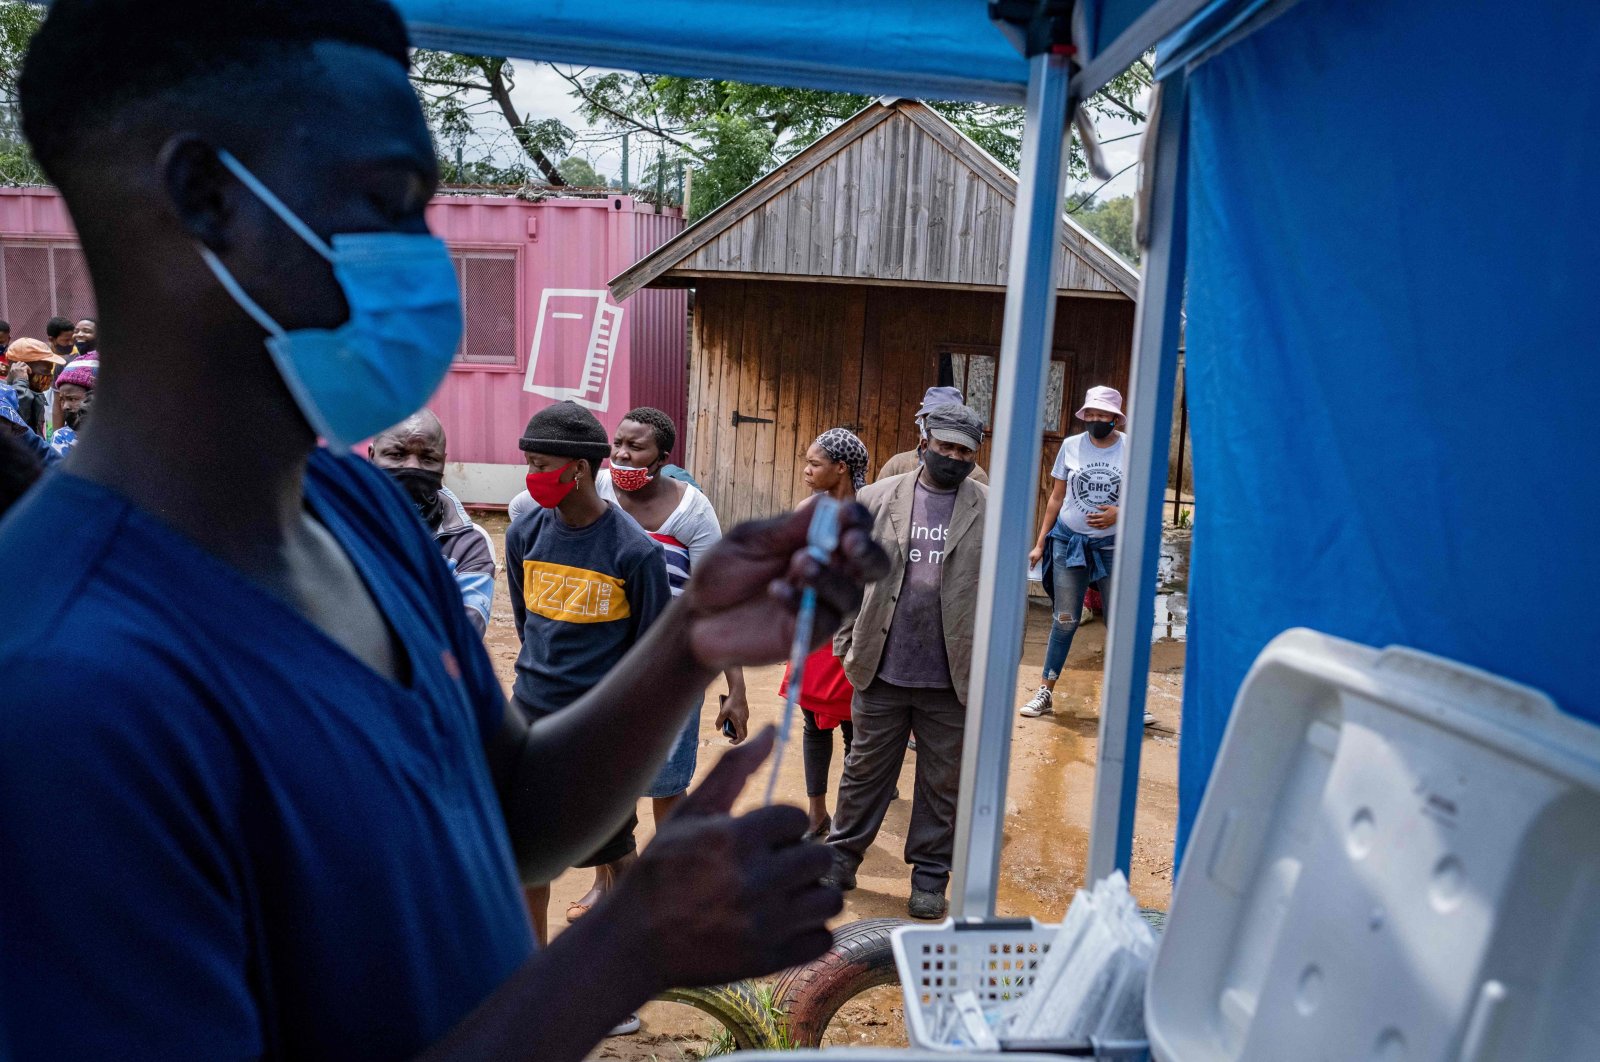 A health worker fills up a syringe with a vaccines dose against COVID-19 as people queue at the Kya Sands informal settlement to be vaccinated by the Witkoppen clinic in Johannesburg, South Africa, Dec. 8, 2021. (AFP Photo)